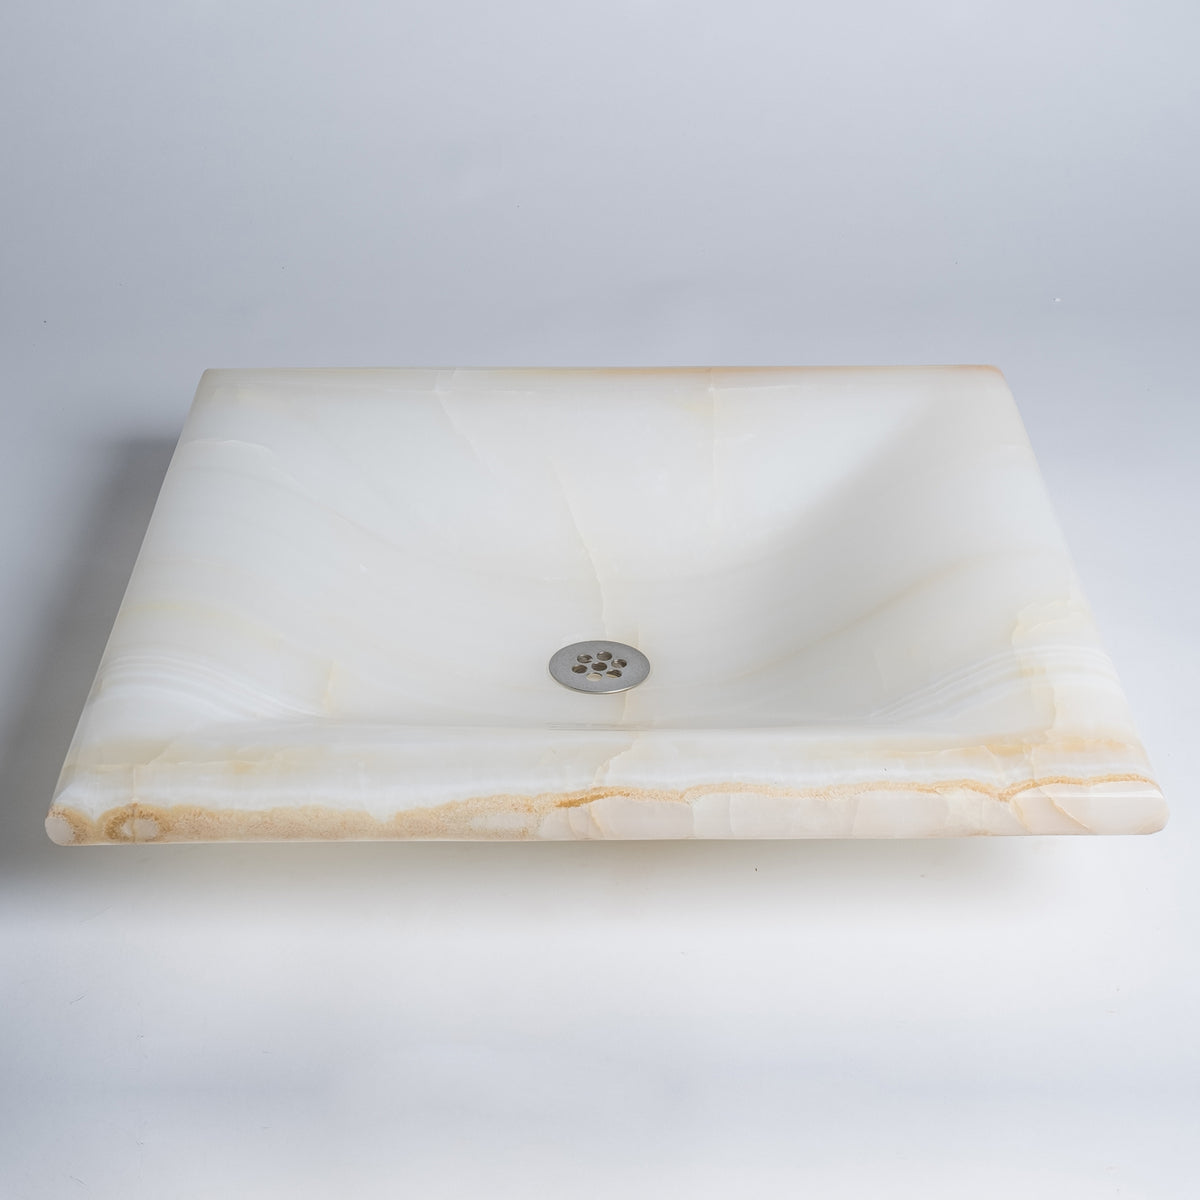 Square Onyx Vessel Sink image 1 of 3